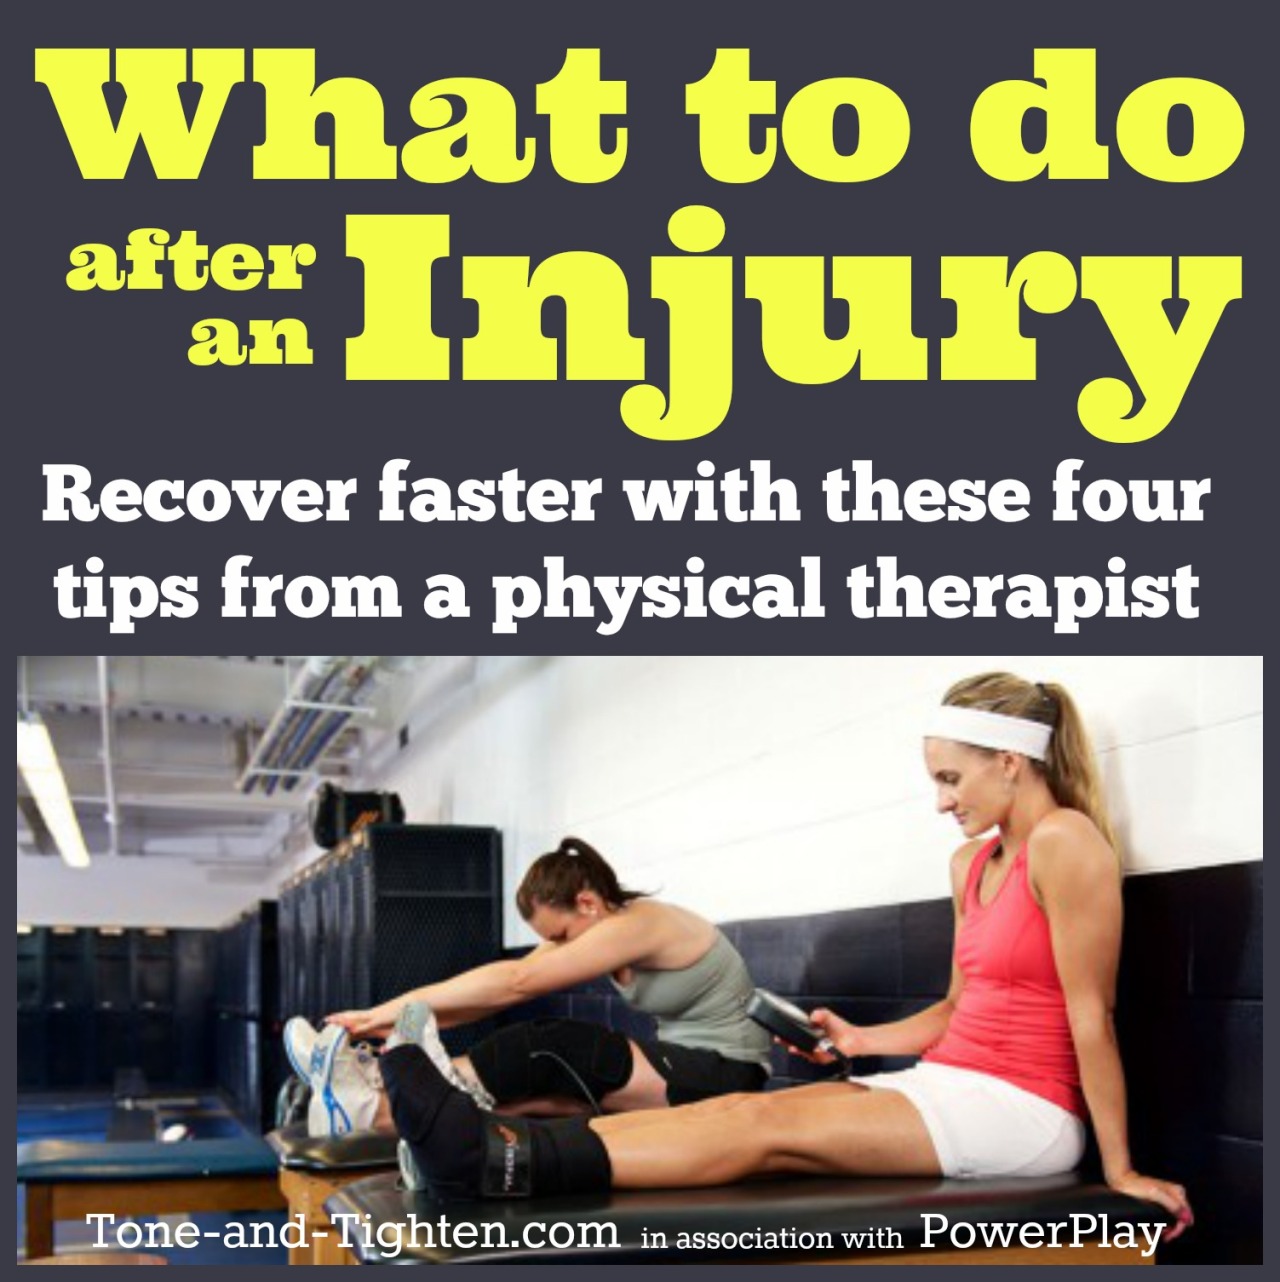 What should you do after an injury? Get the answer from the physical therapist at Tone-and-TIghten.com! Learn the proper steps to maximize healing and get back in the game faster right here: http://ow.ly/FLLtp